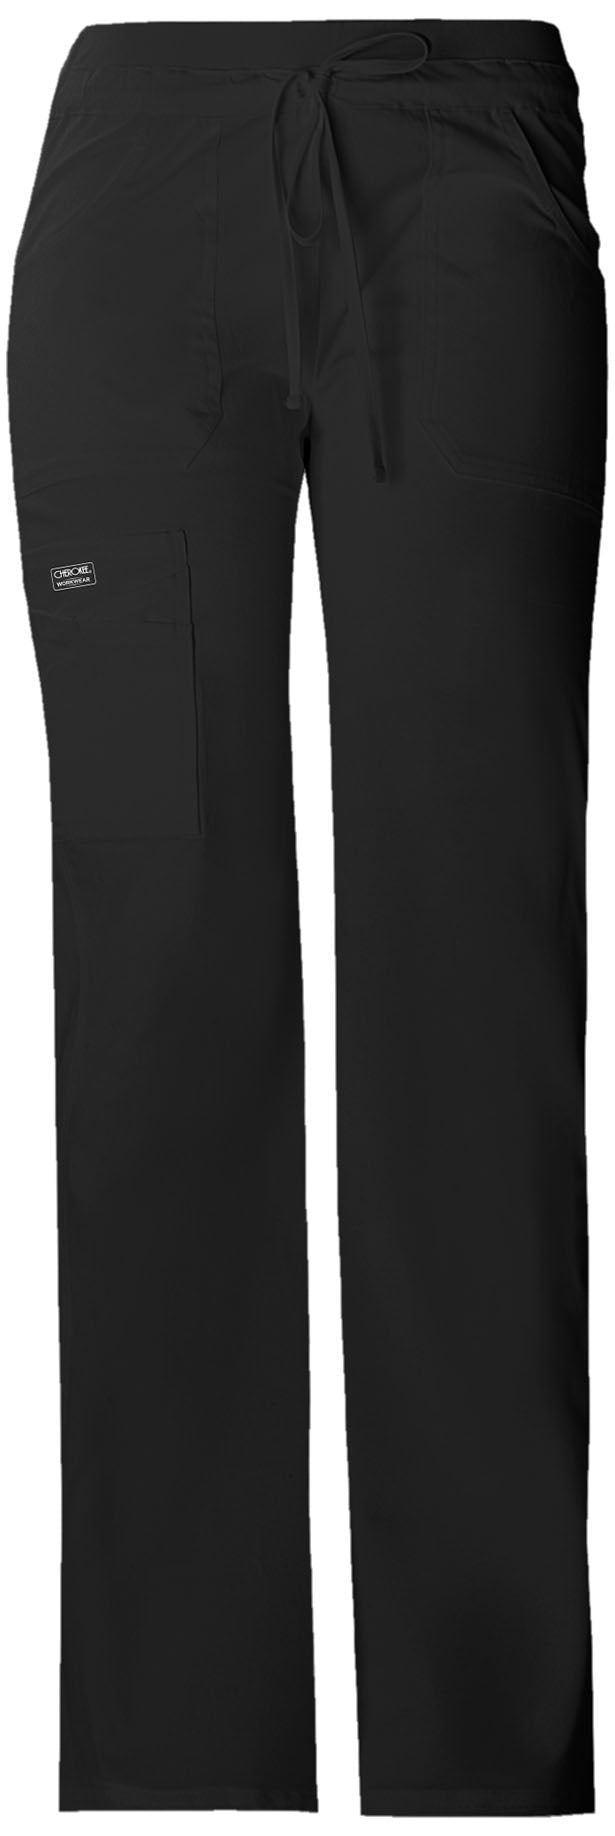 CHEROKEE Core Stretch Low Rise Drawstring Cargo Pant